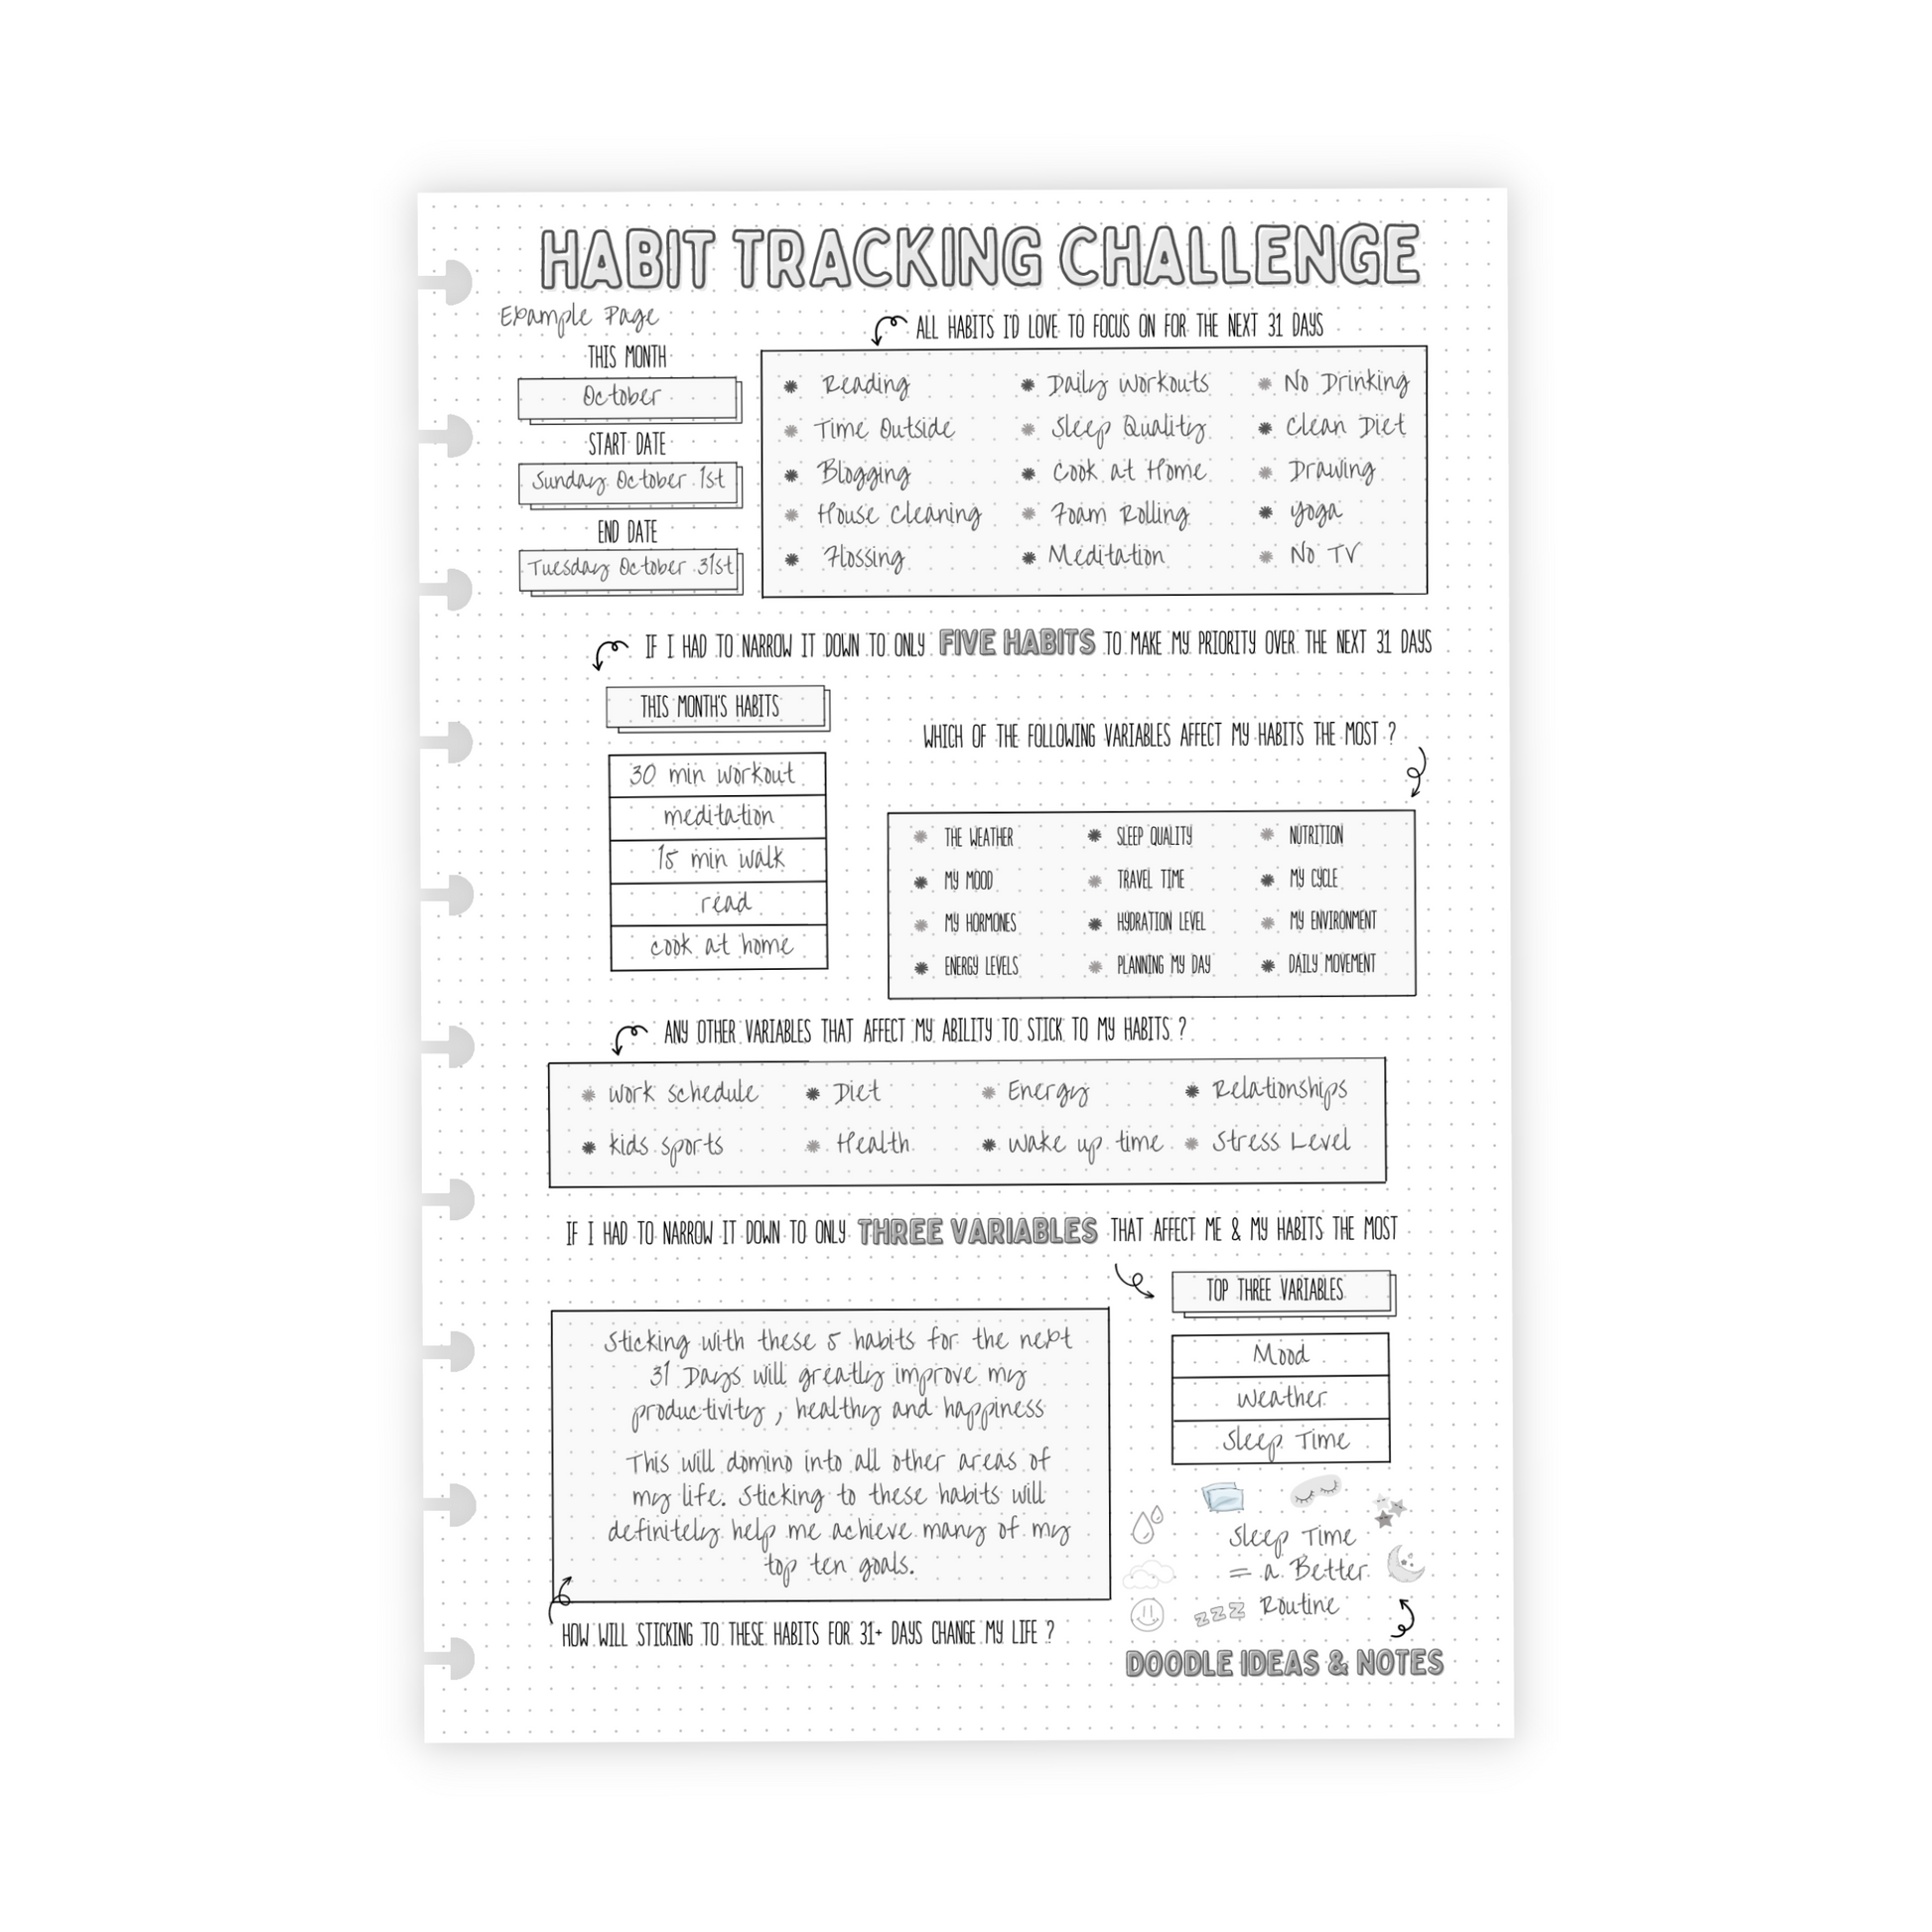 "Habit Tracking Challenge" example page